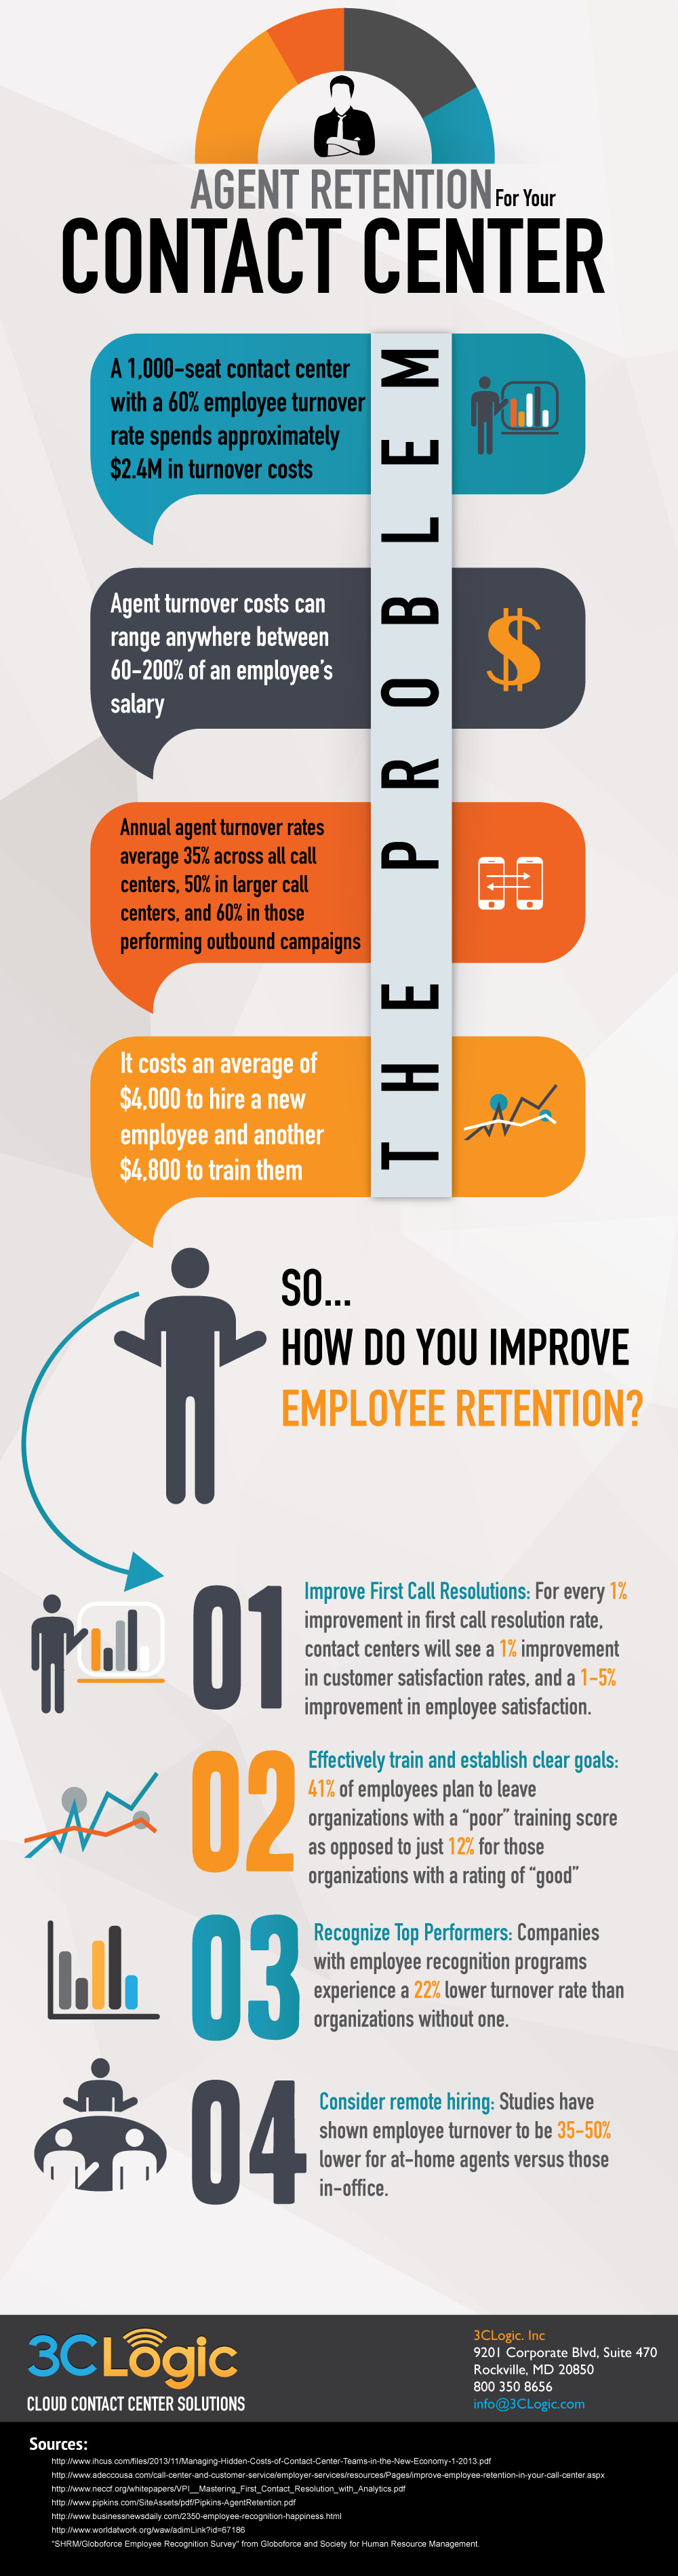 3CLogic-Infographic-Agent-Retention-For-Your-Contact-Center